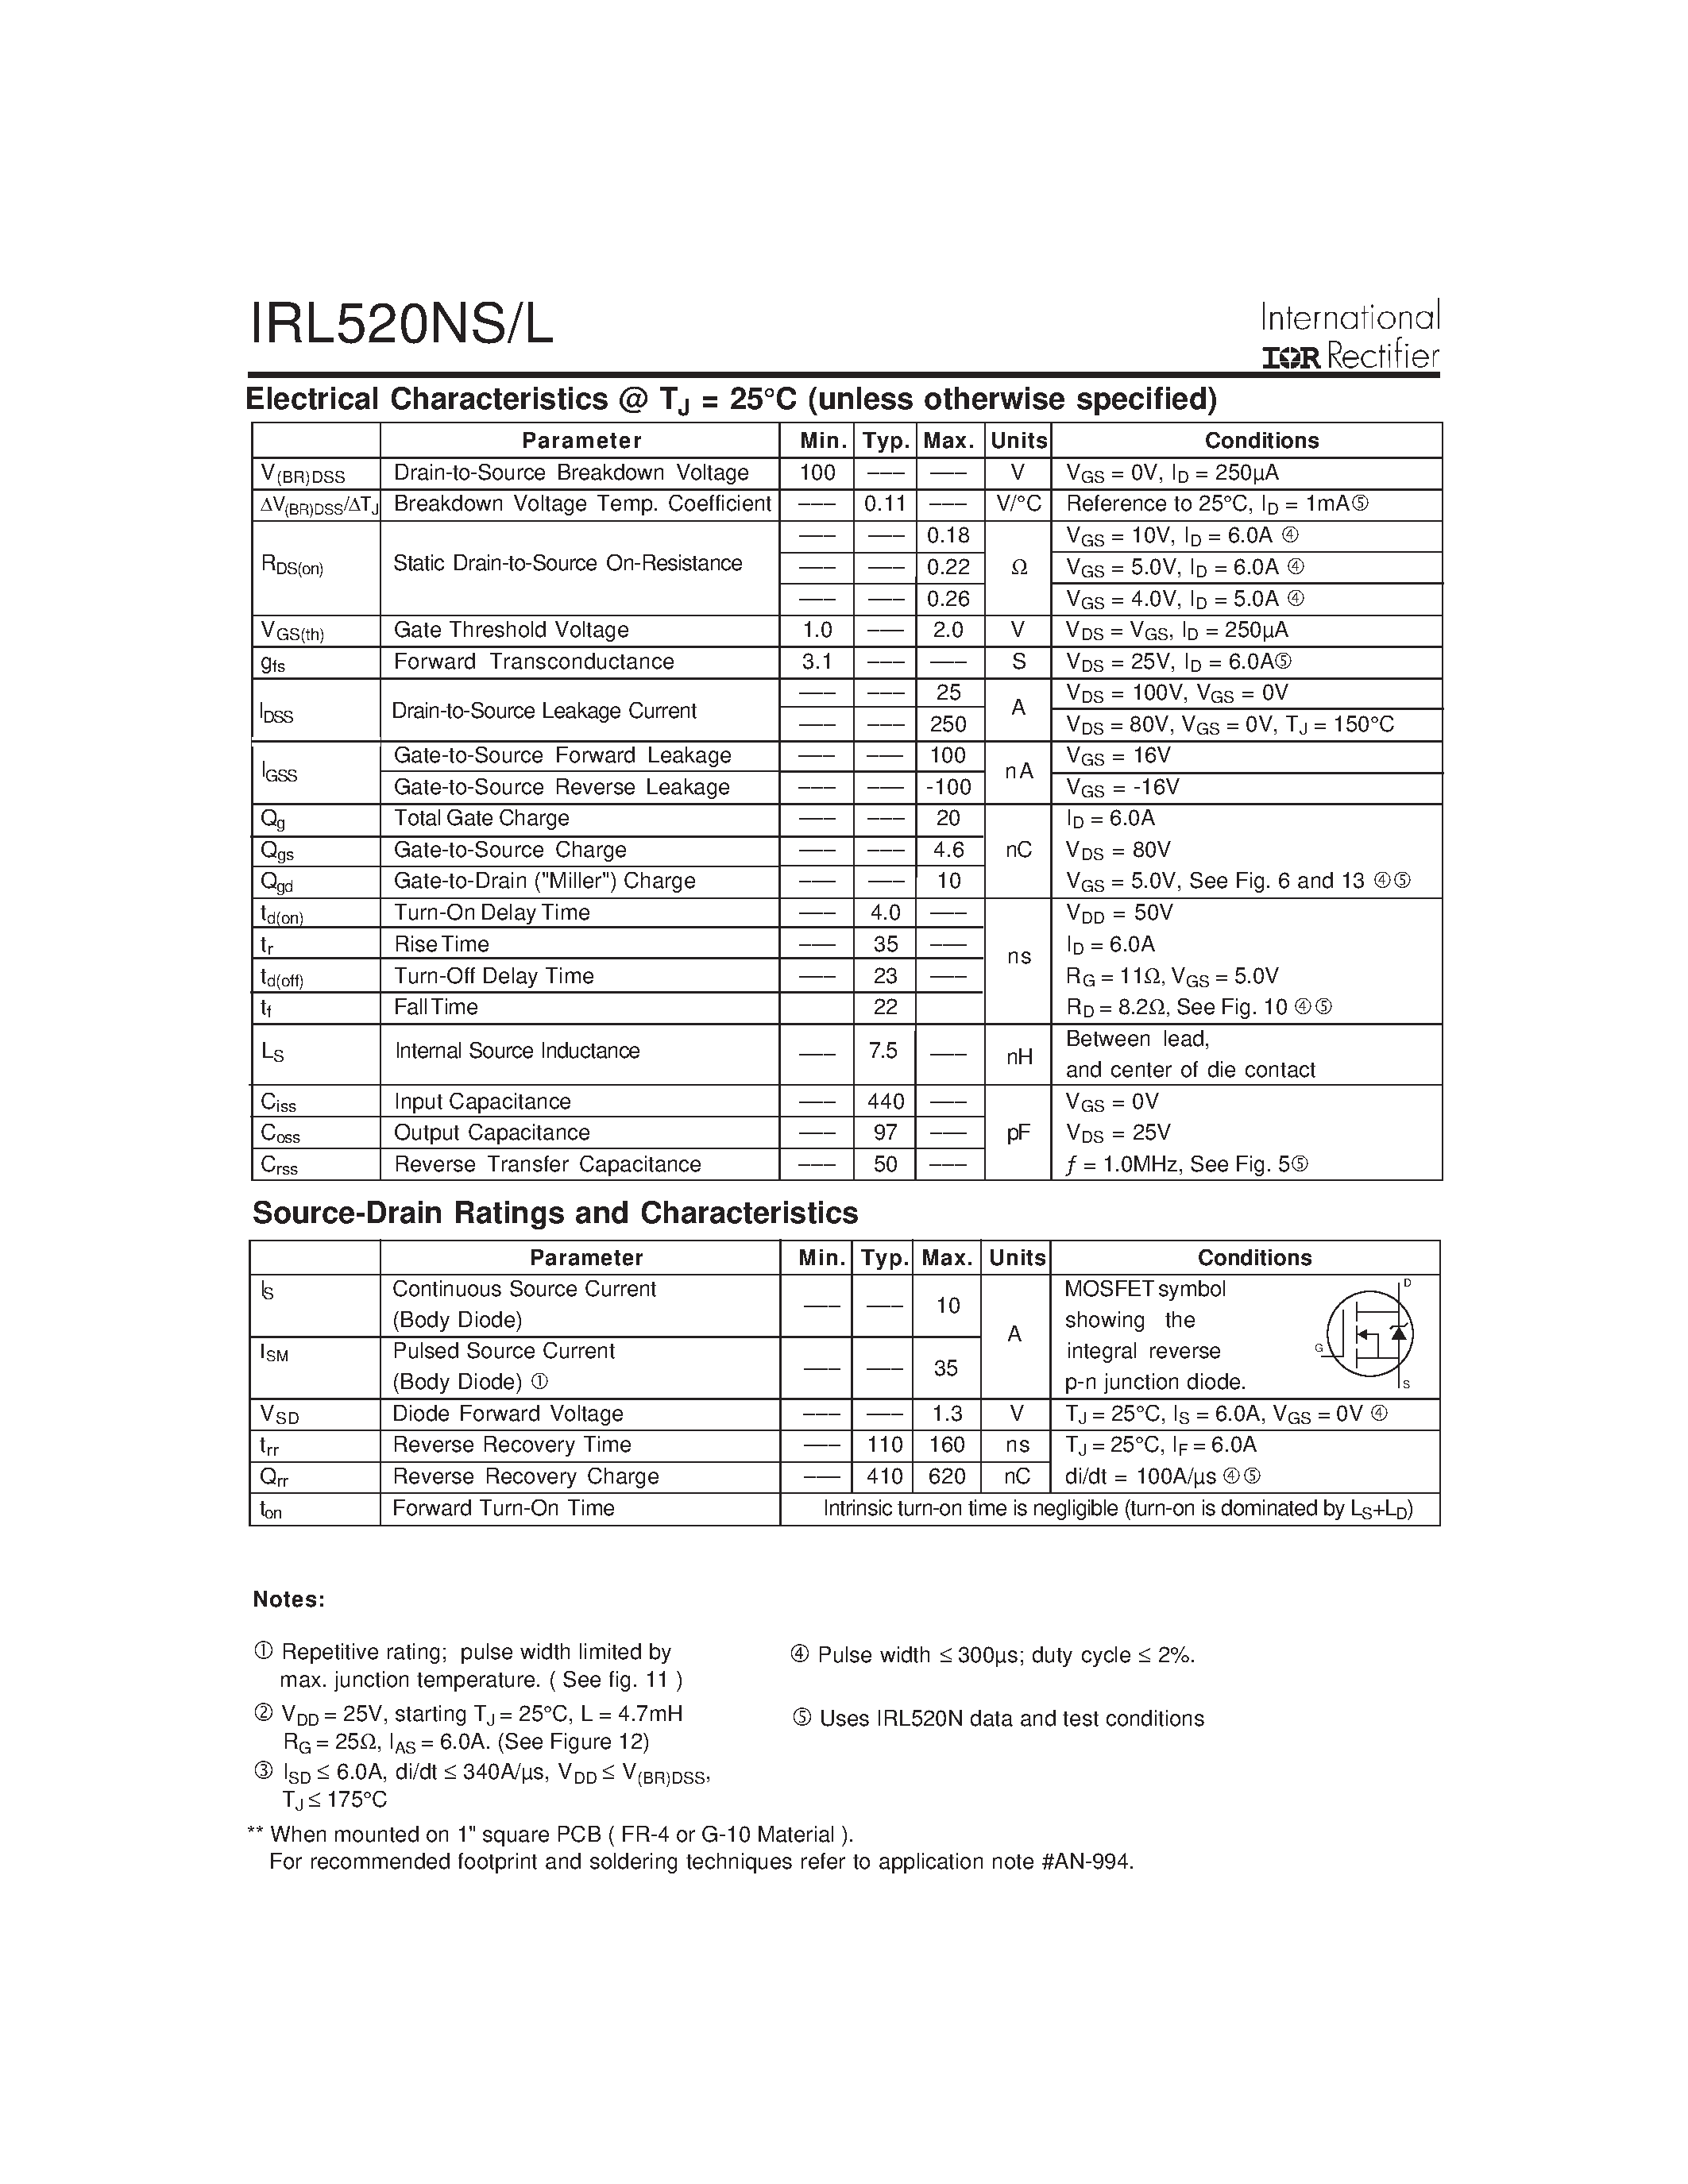 Datasheet IRL520NL - (IRL520NS/L) HEXFET Power MOSFET page 2